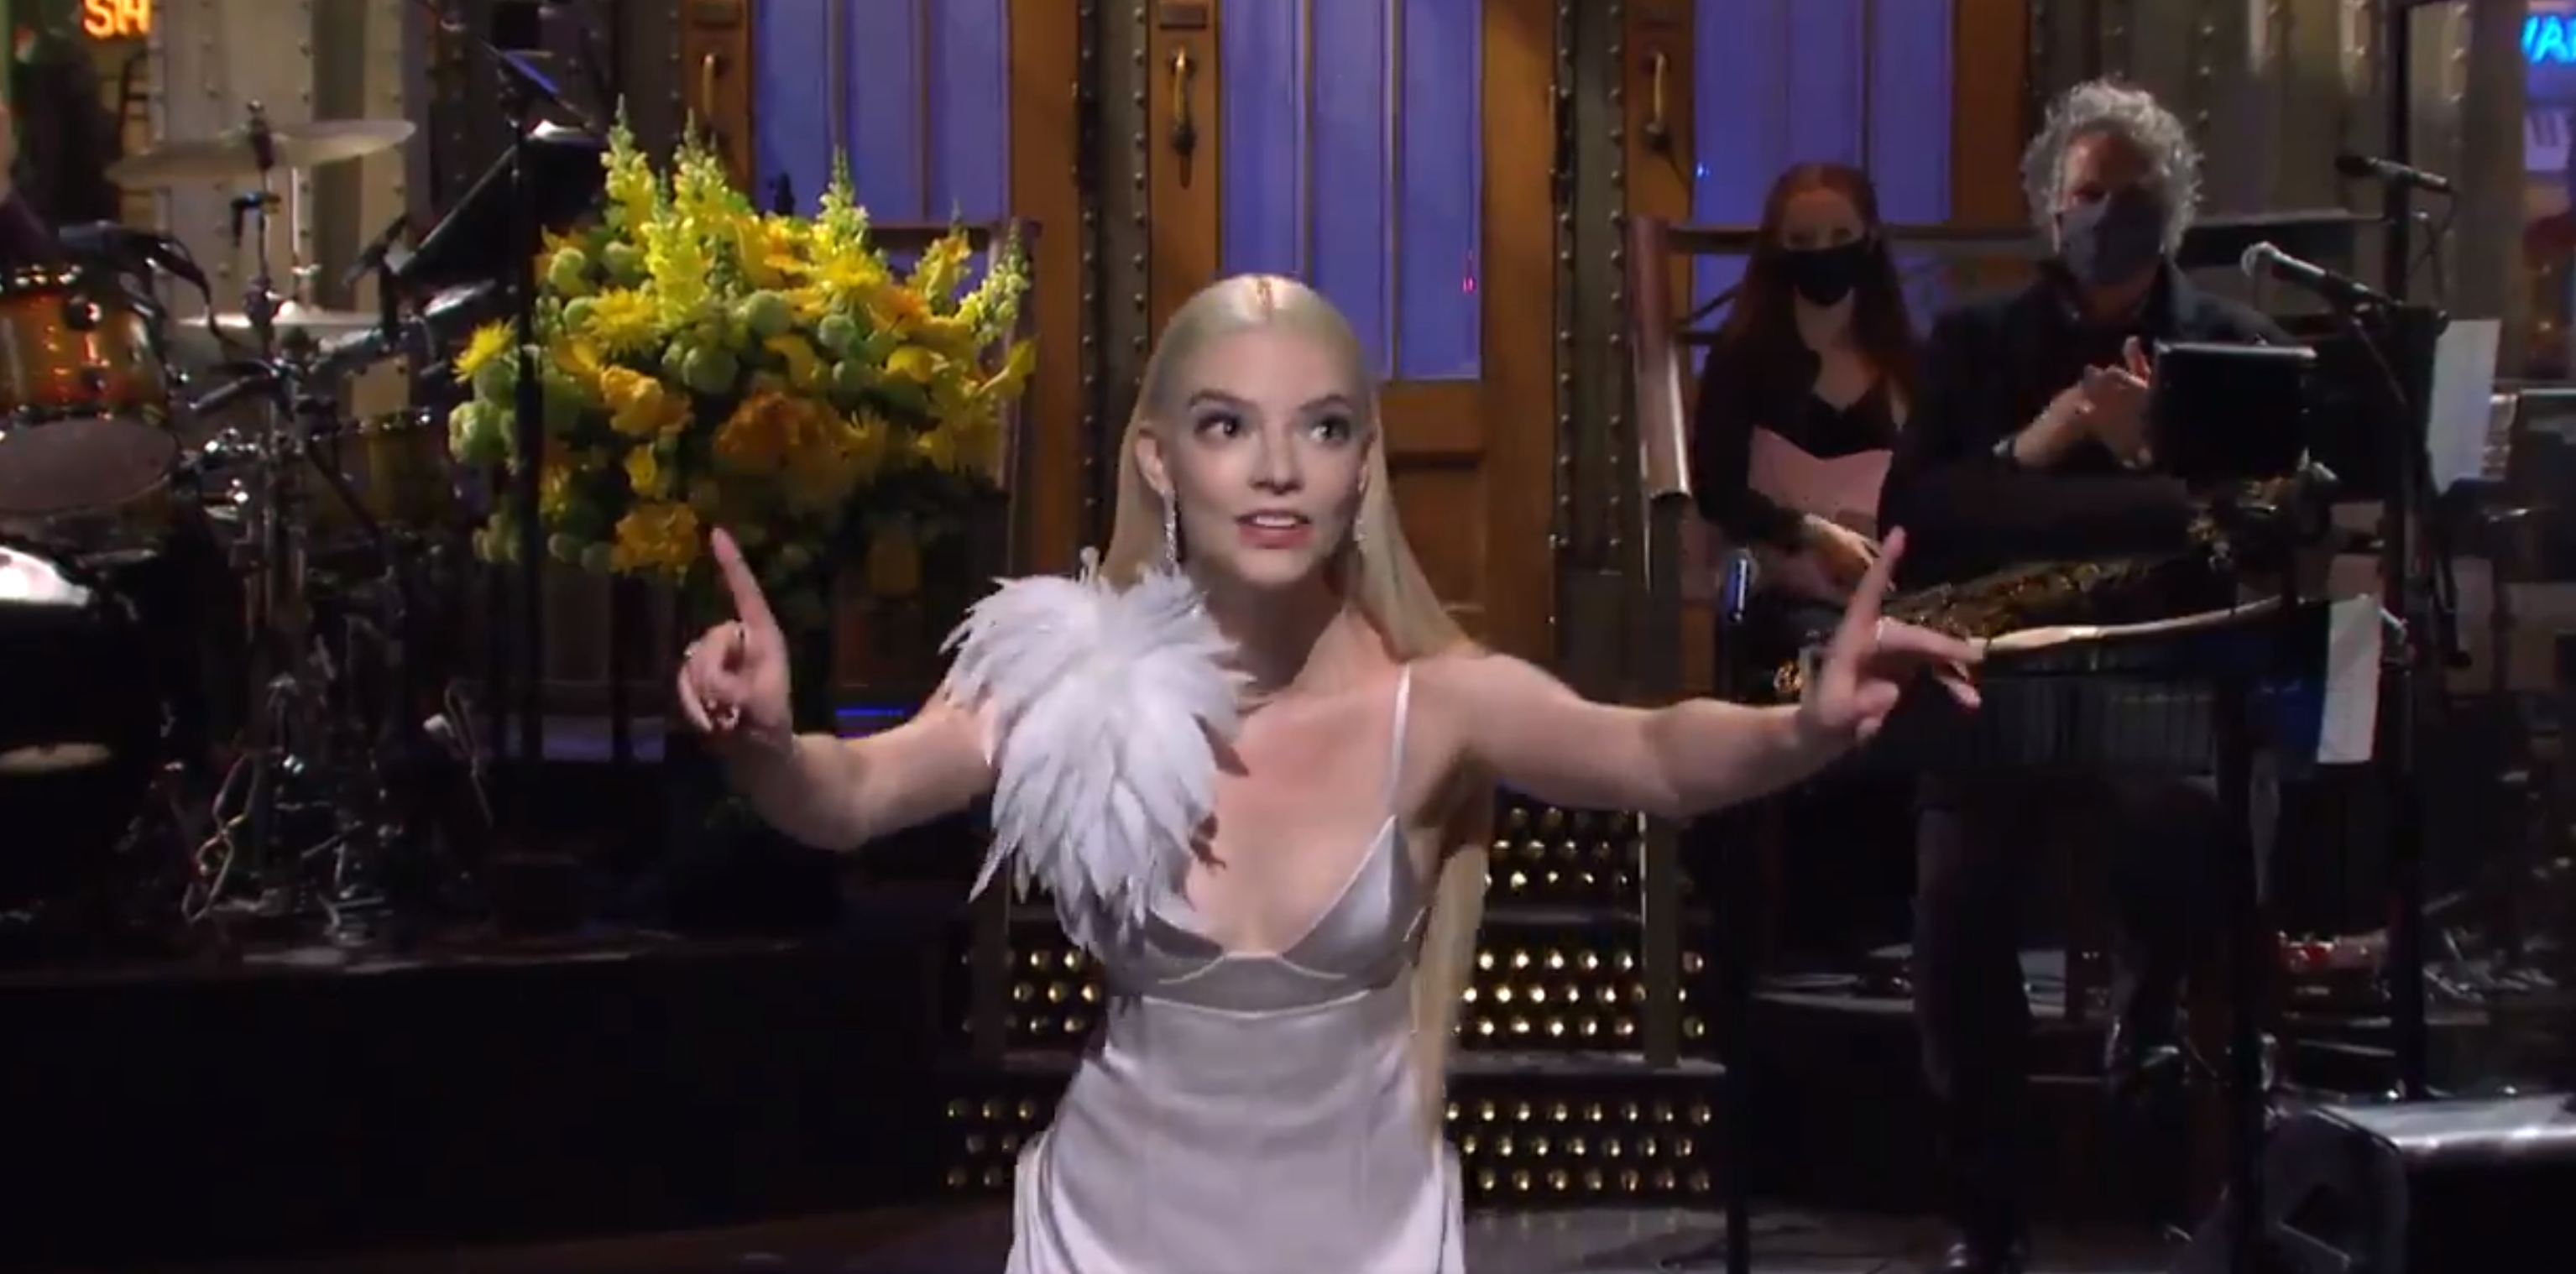 The Prep Routine That Gave Anya Taylor-Joy Gleaming Skin on SNL